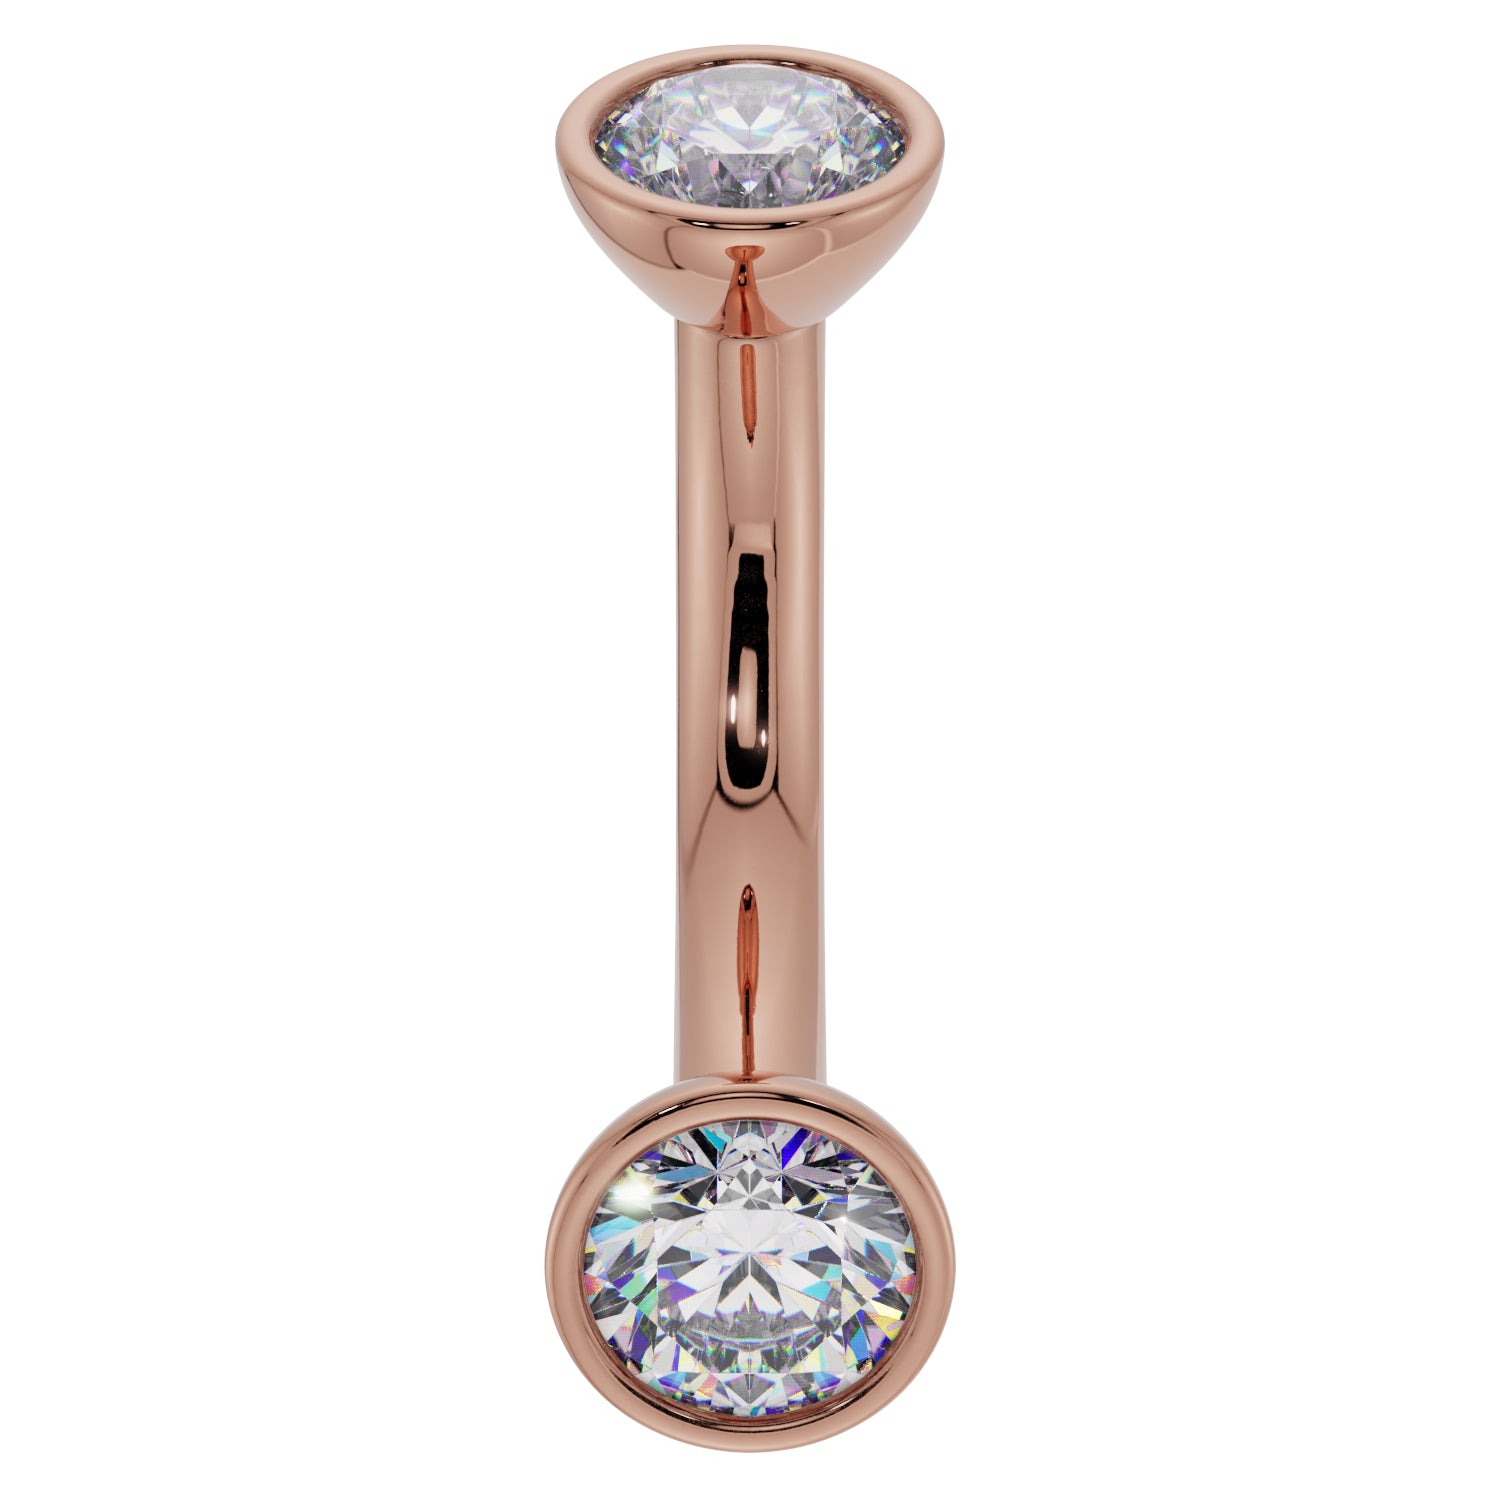 Cubic Zirconia Bezel-Set Eyebrow Rook Belly Curved Barbell-14K Rose Gold   14G (1.6mm) (Belly Ring)   7 16